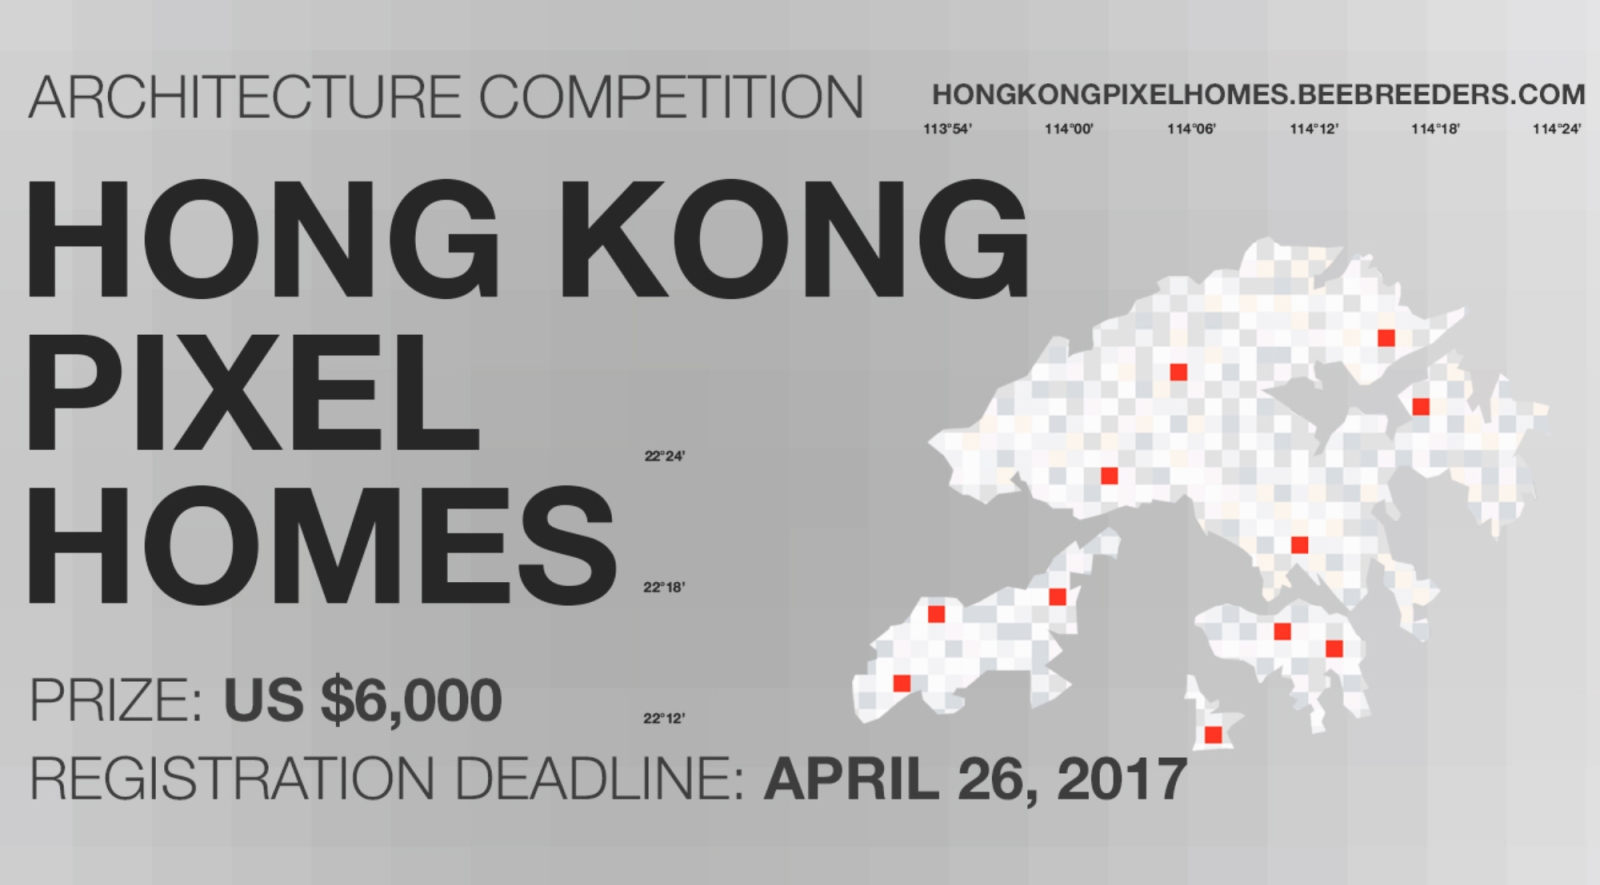 Hong Kong Pixel Homes competition